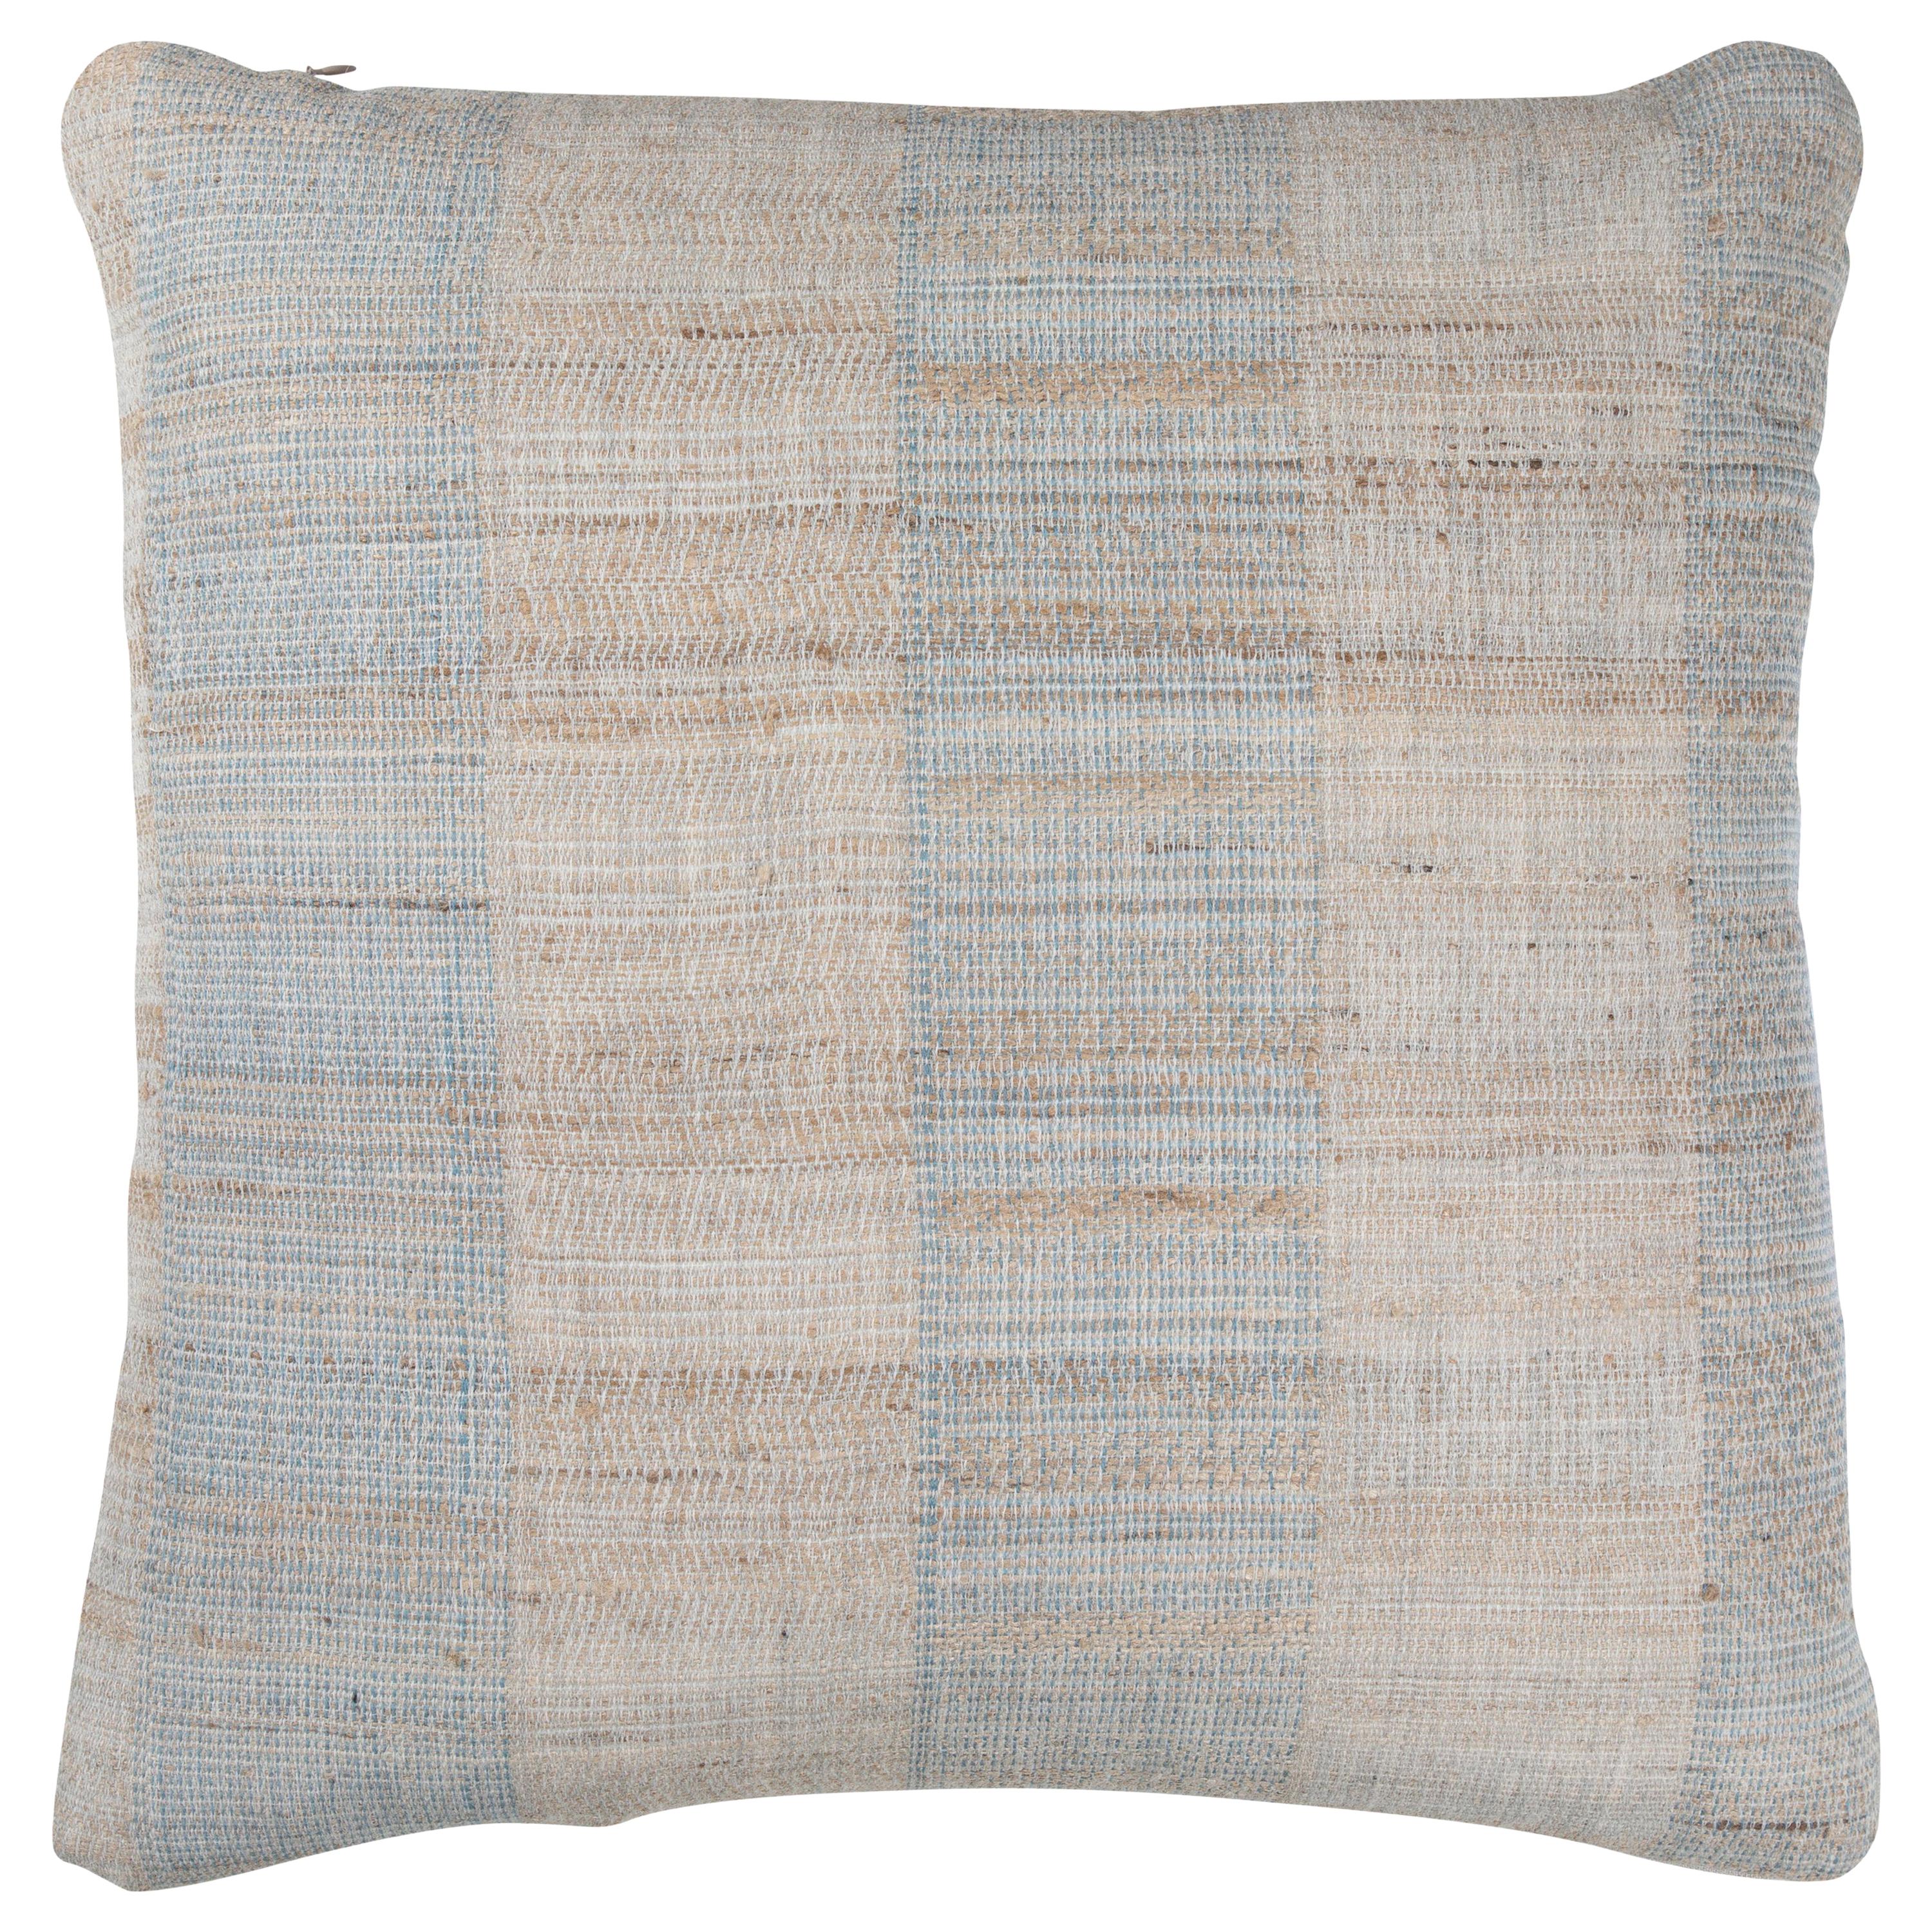 Indian Handwoven Pillow Tan and Light Blue For Sale